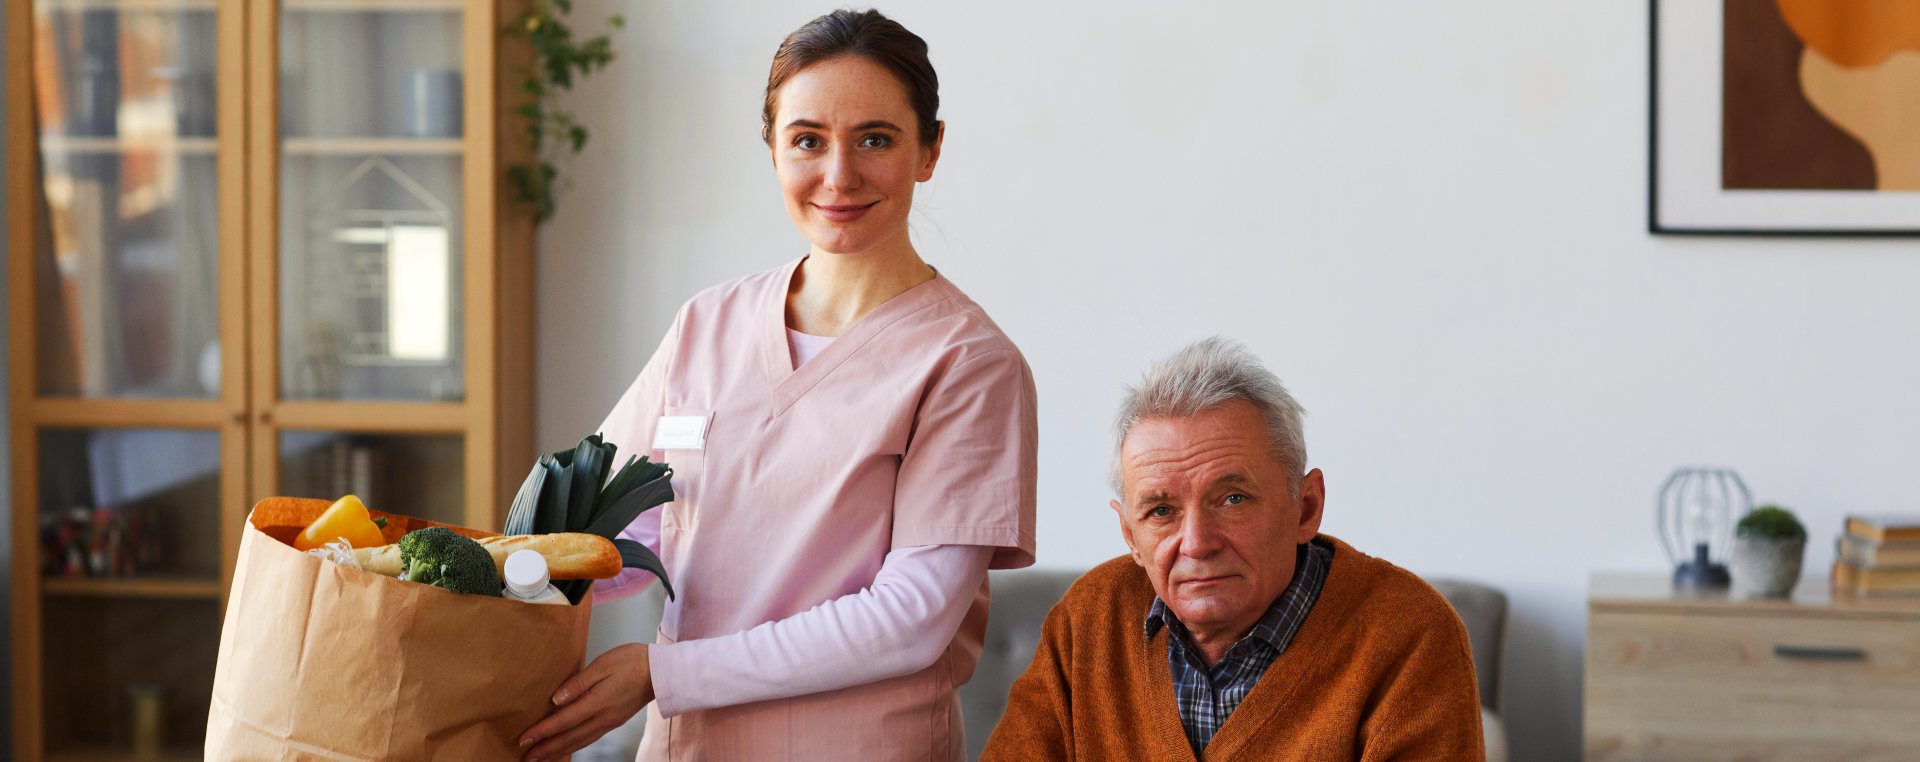 image of a female caregiver and an elderly man